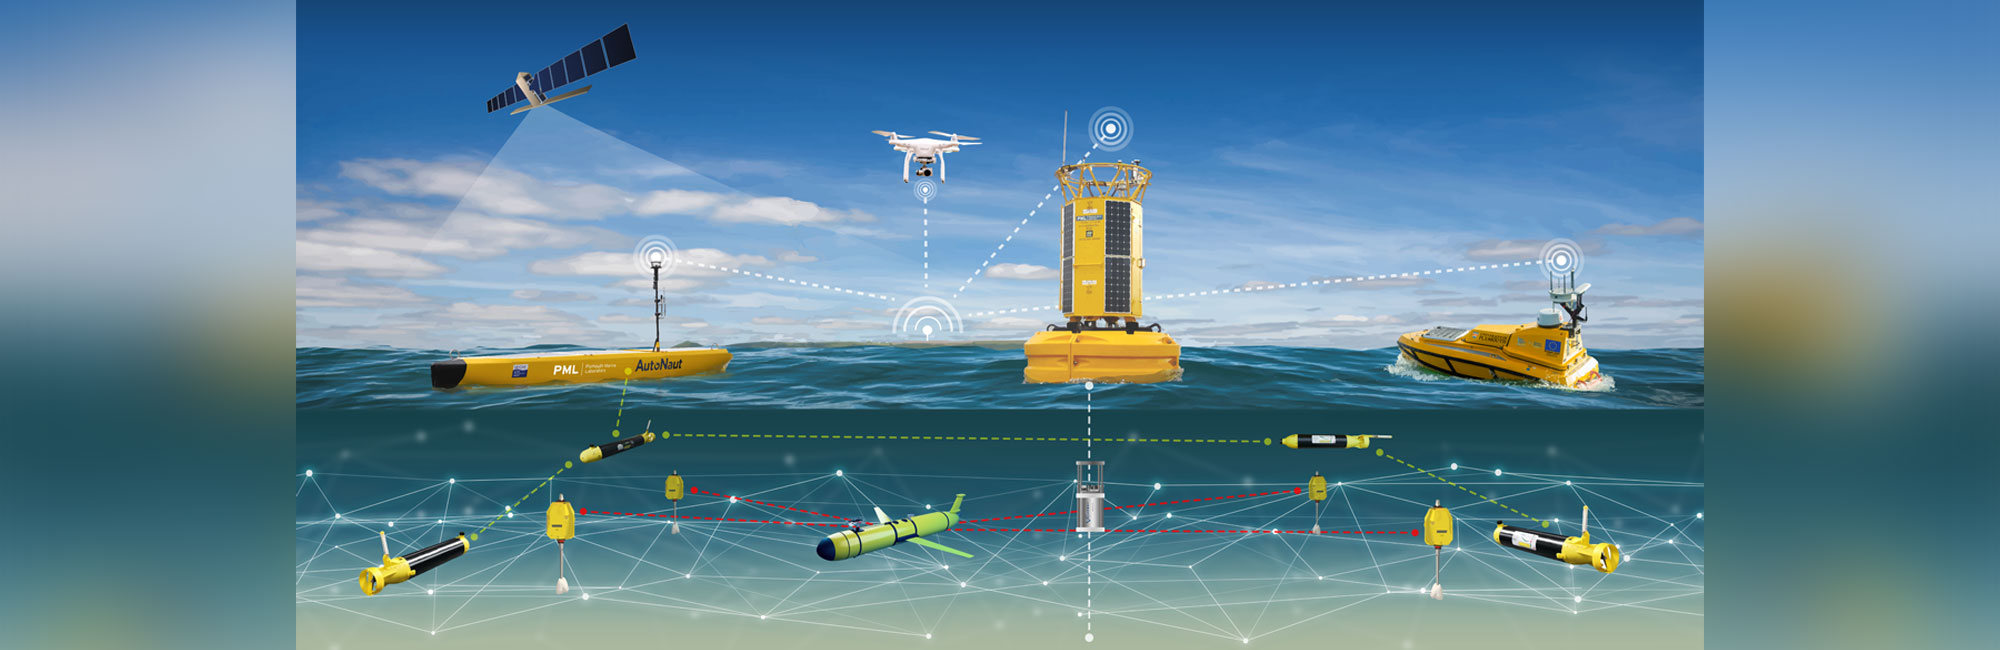 Digital illustration showing sea surface and below surface vessels and elements that make up the smart sound such as a drone, satellite, vessels and underwater gliders